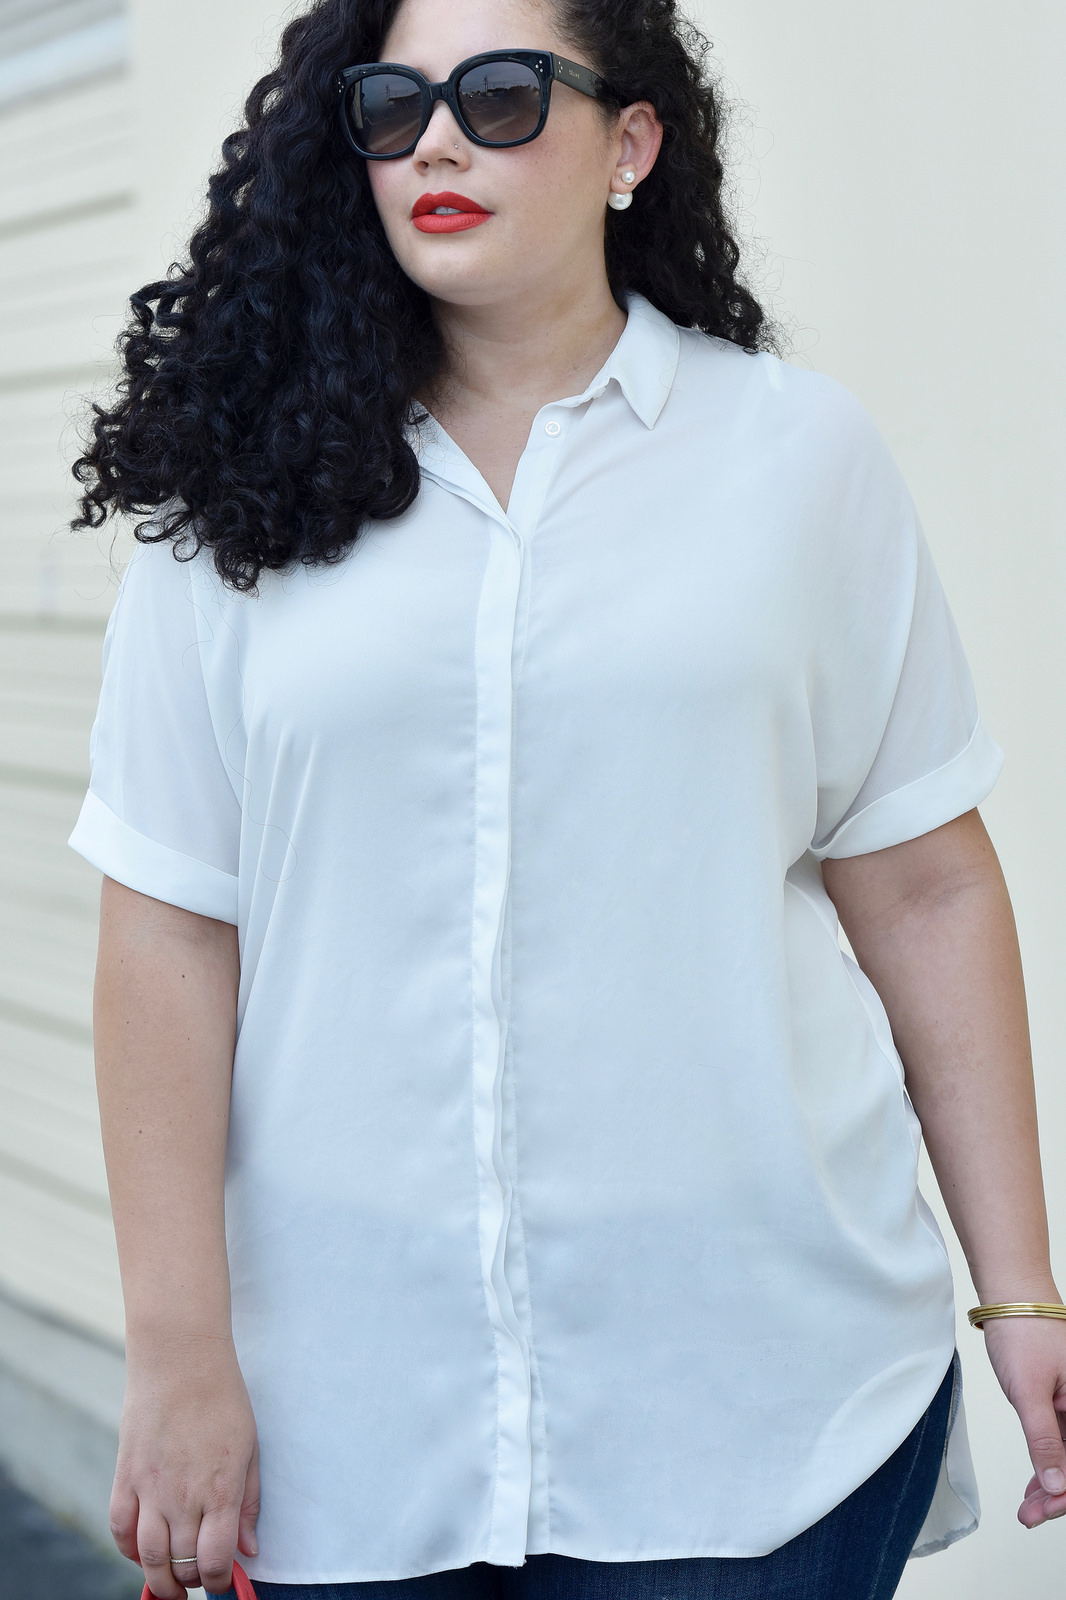 Tanesha Awasthi wearing a white blouse via Girl With Curves.